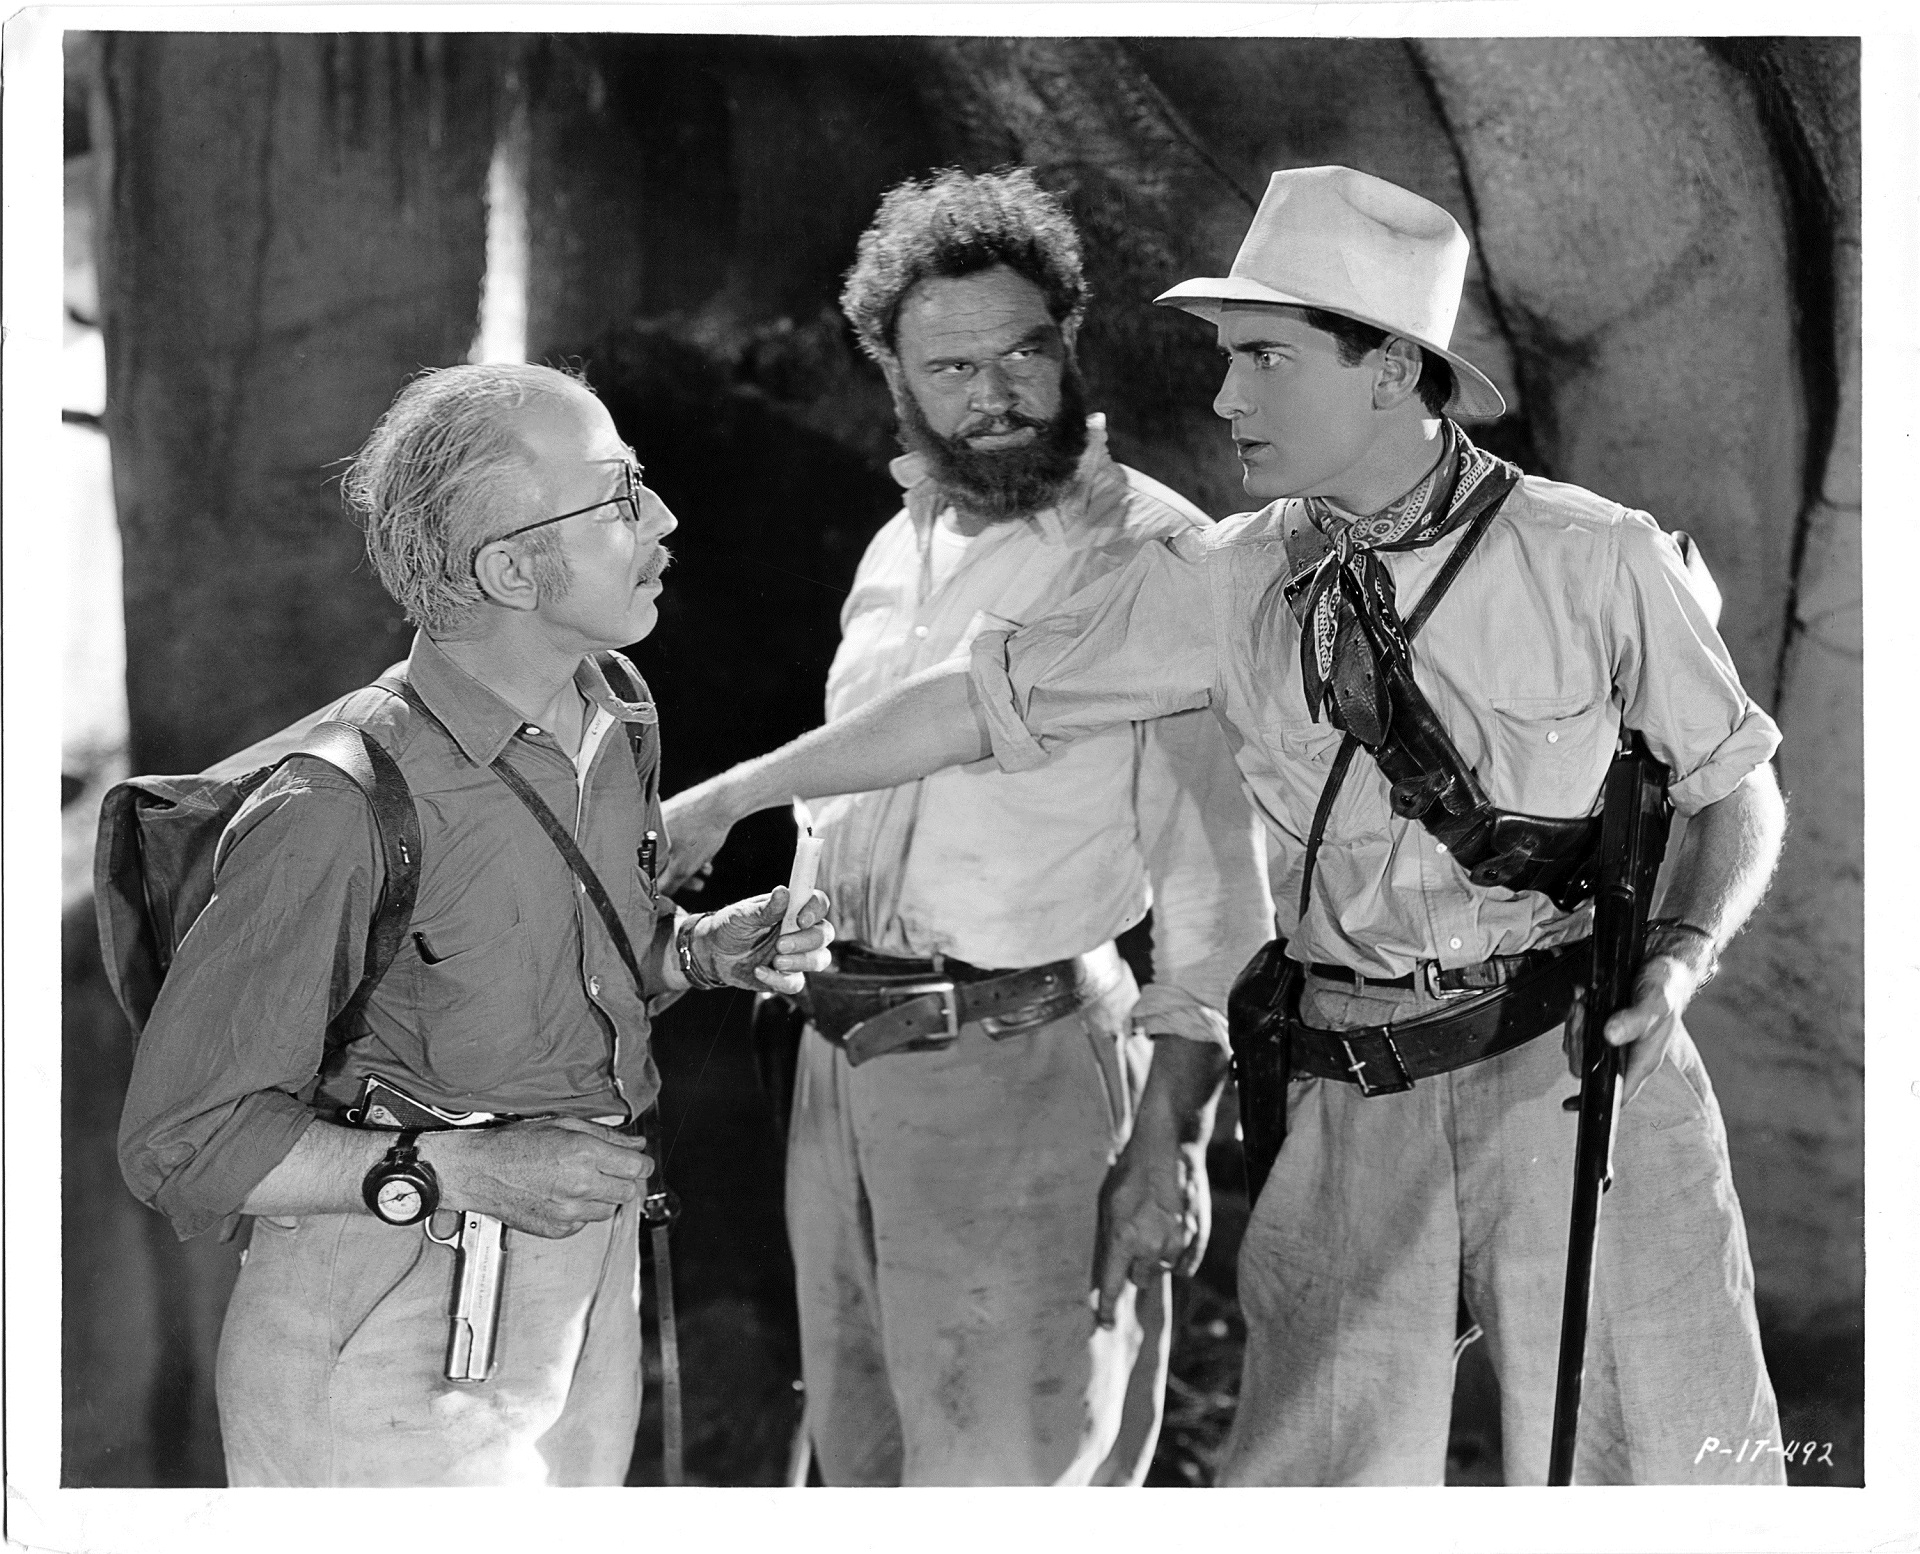 Photograph from the film, the lost world, of three men arguing